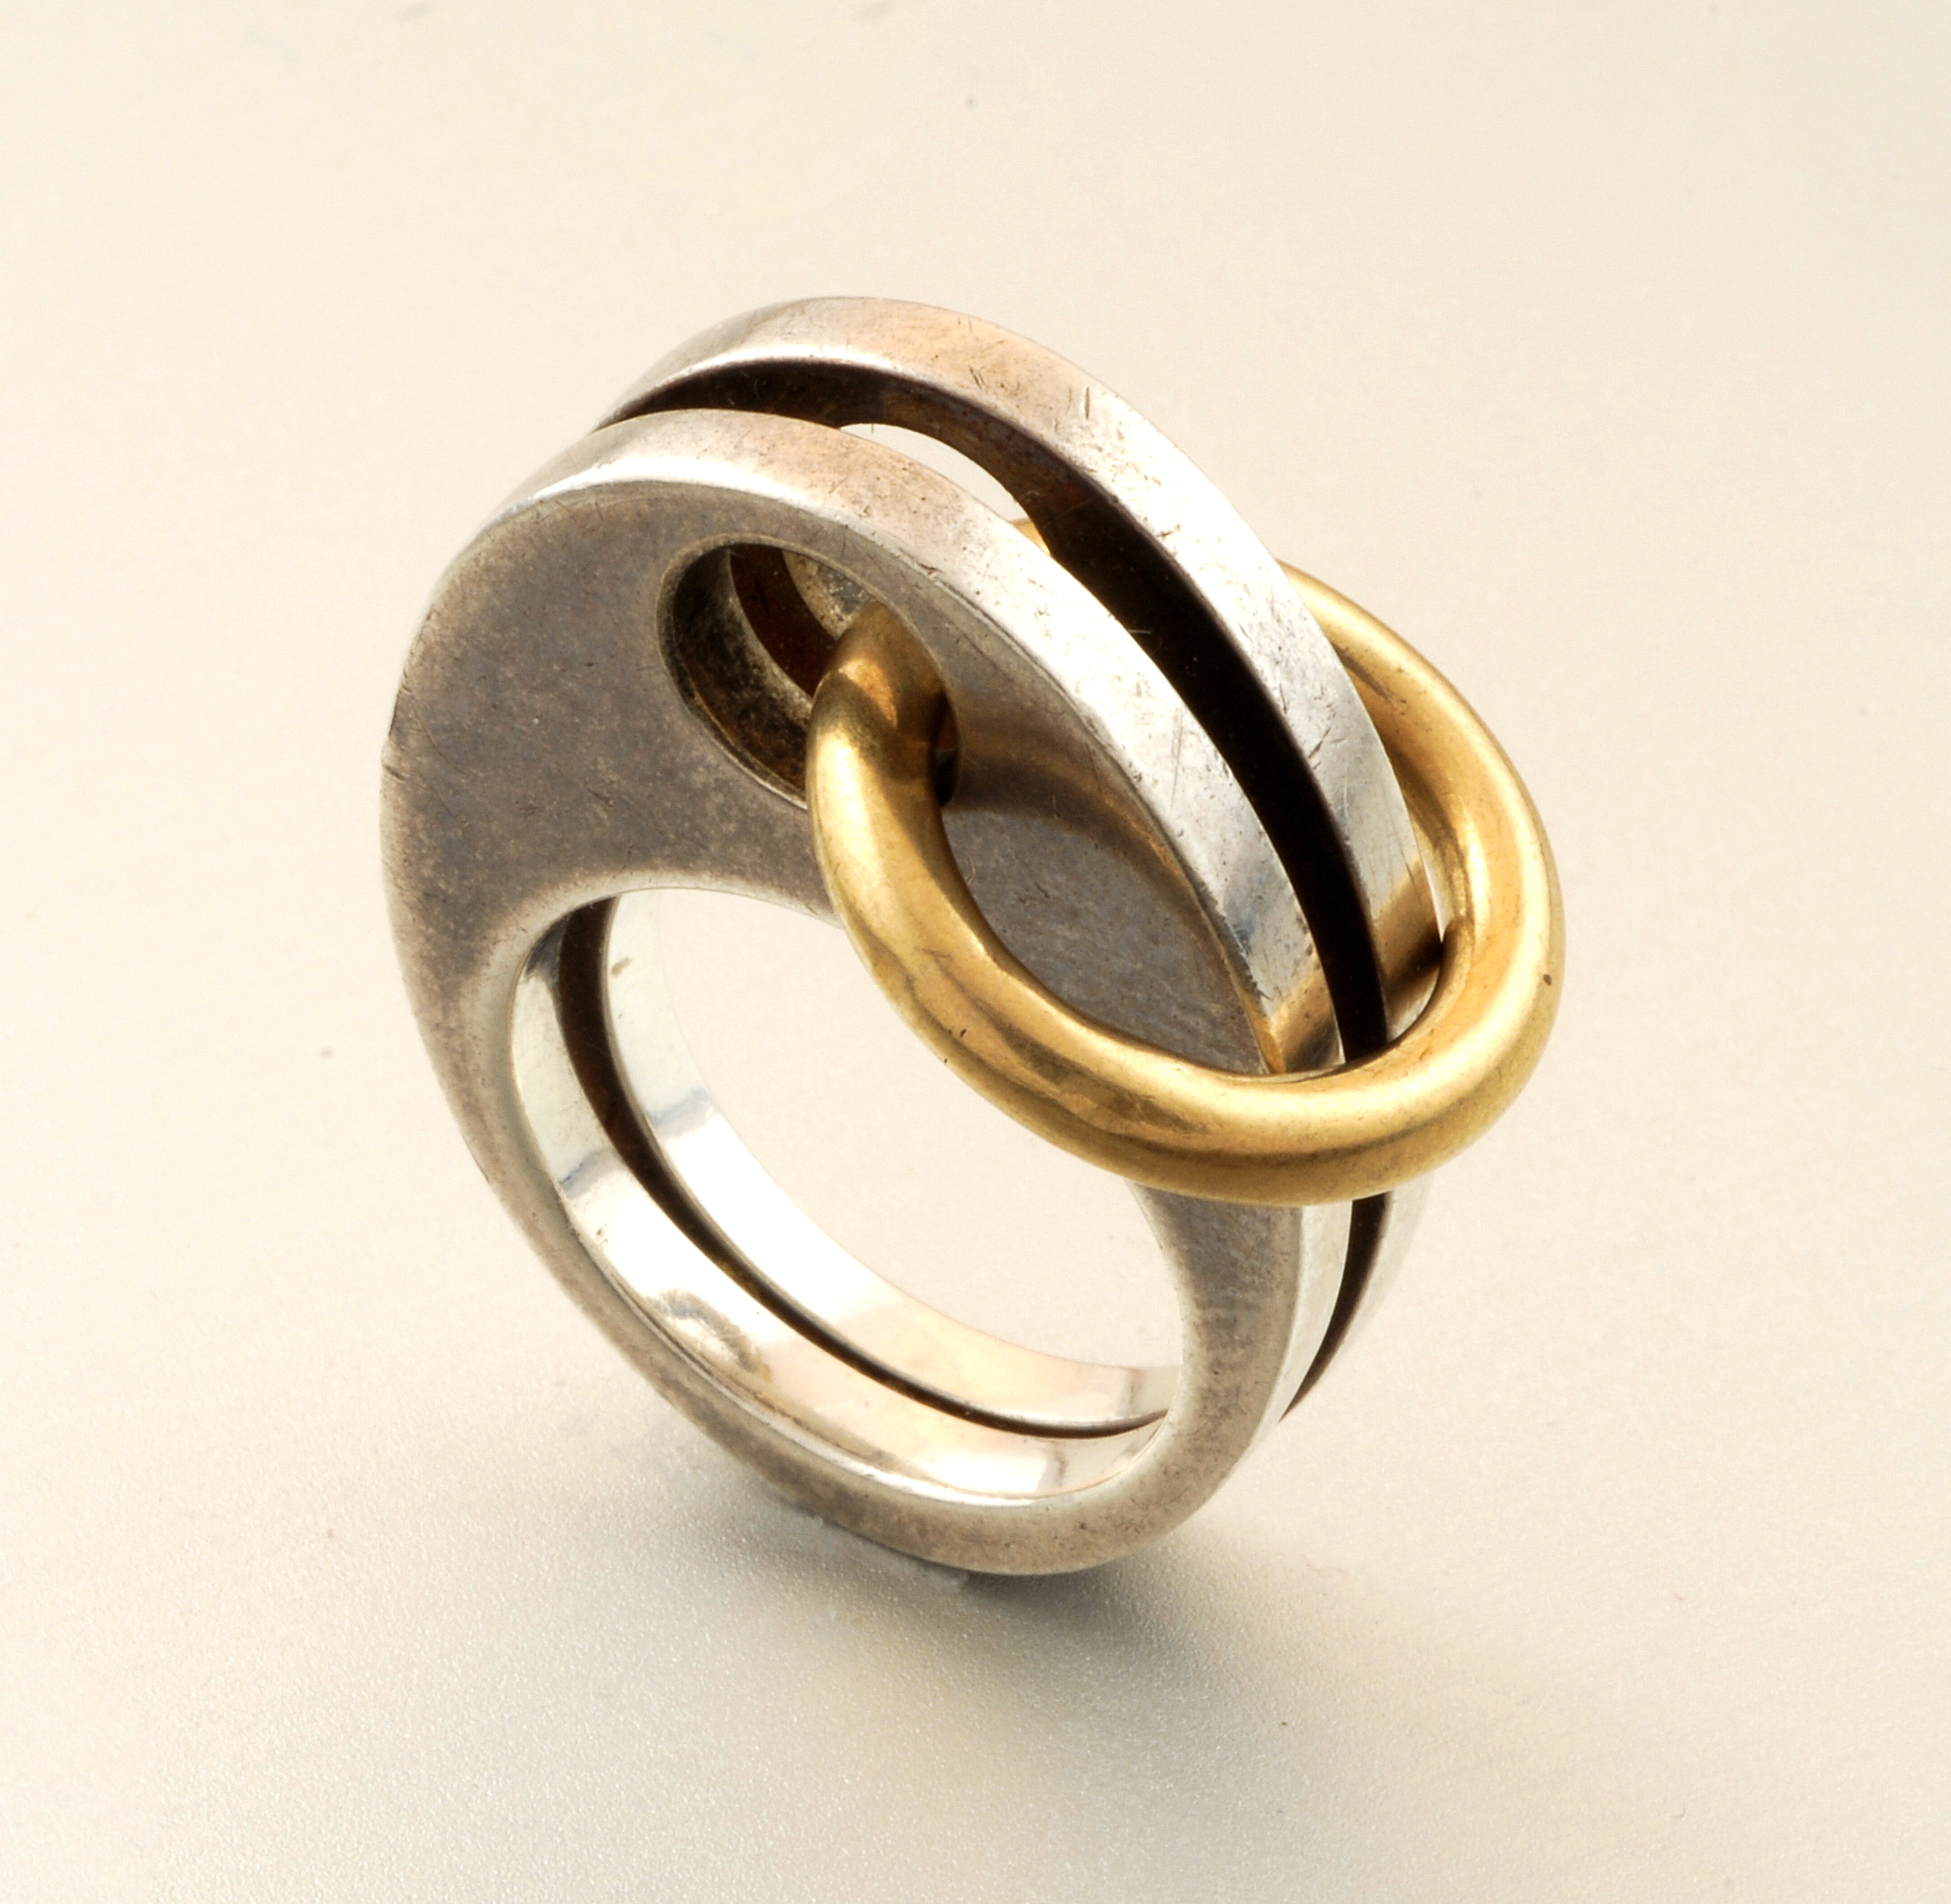 Pierre Cardin Sterling and 14K gold ring, signed, c. 1970’s